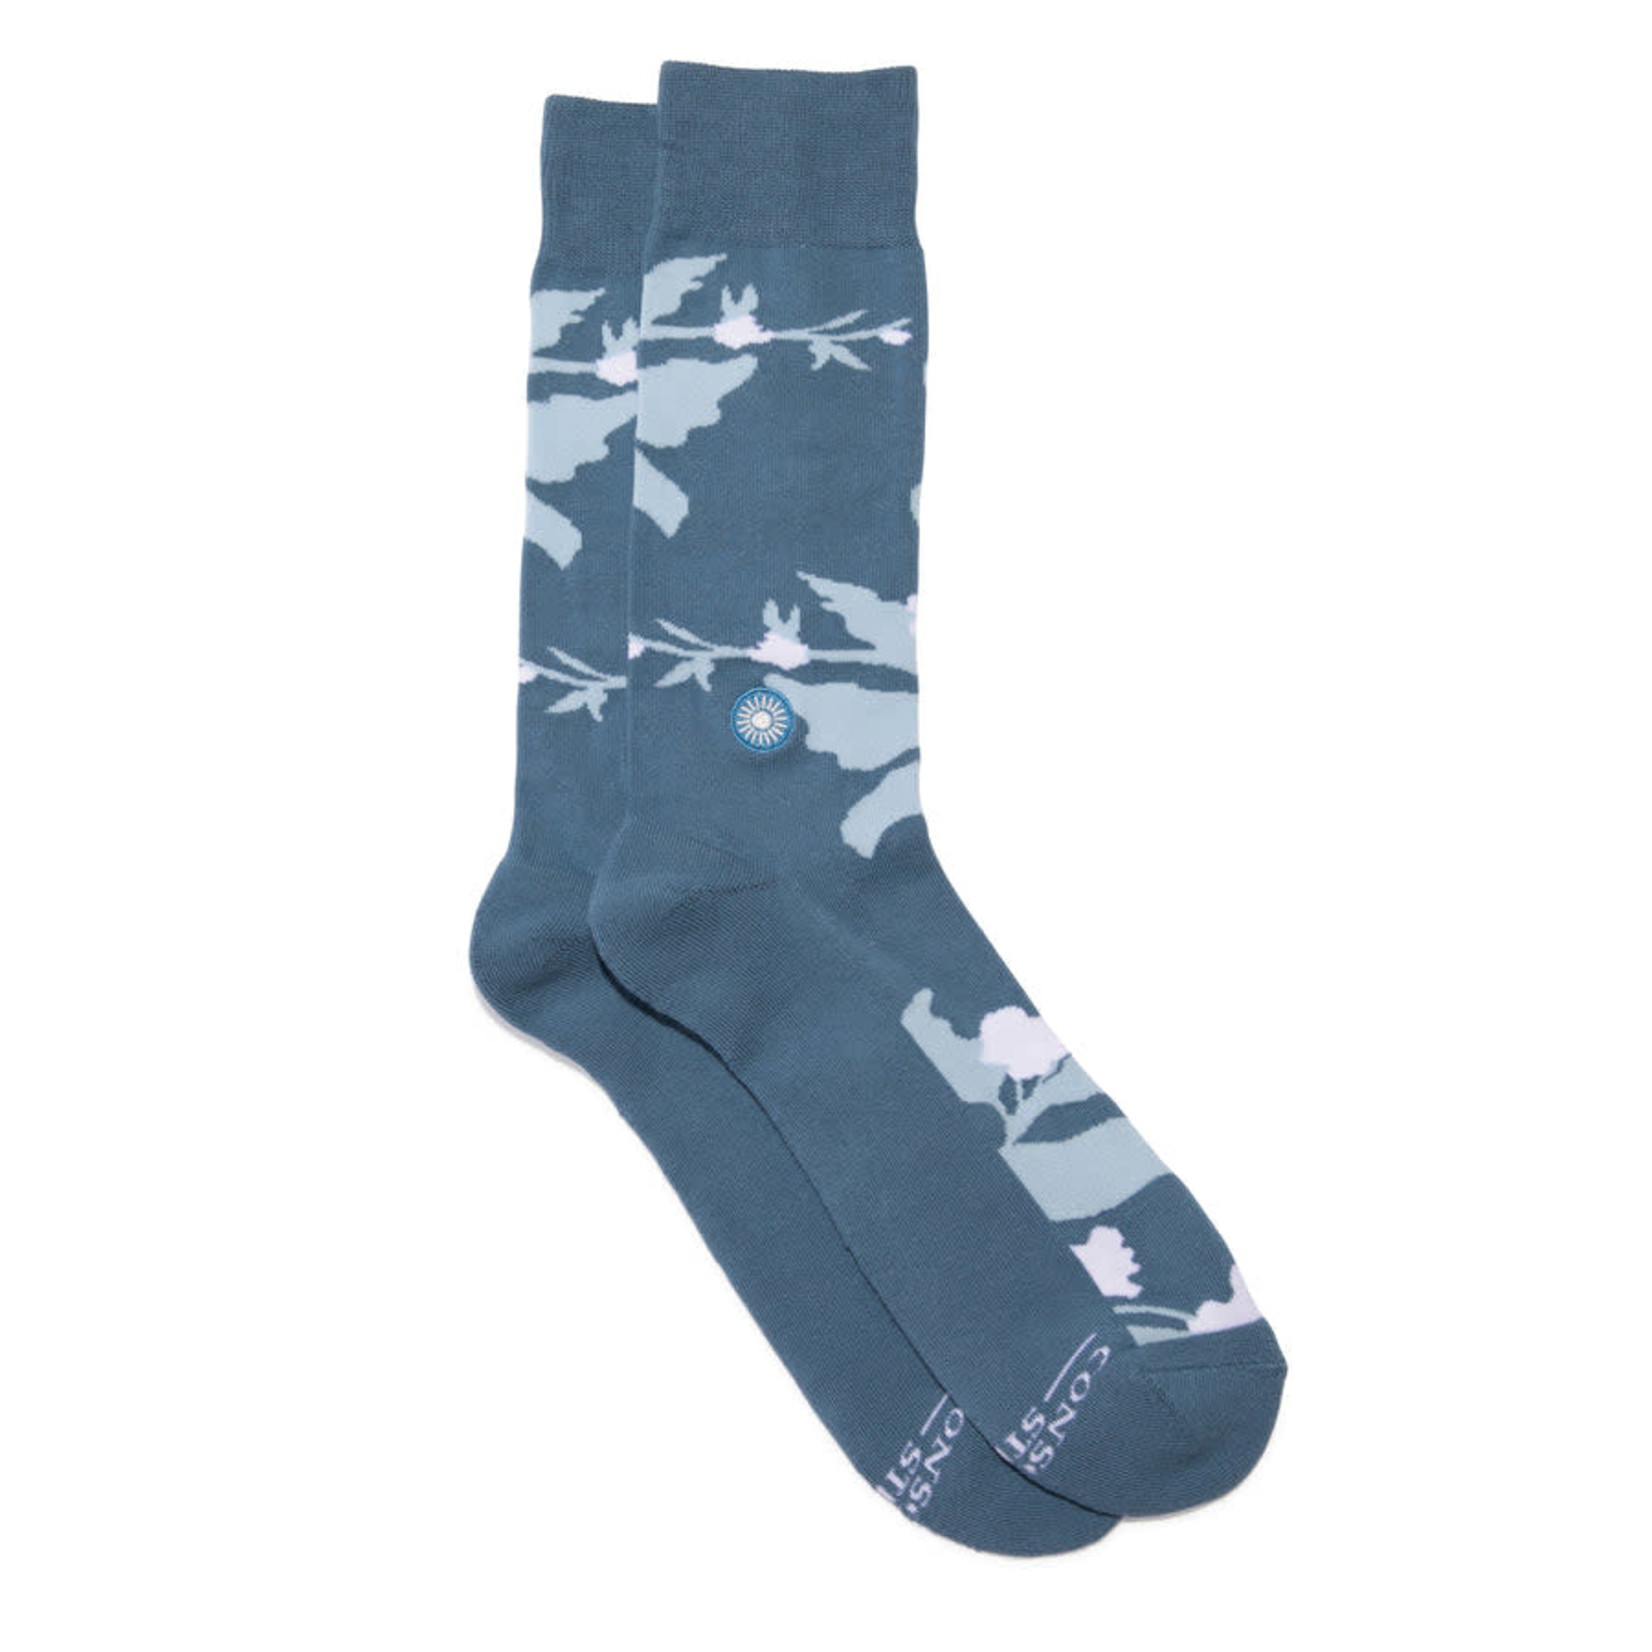 Conscious Step Conscious Step Socks that Support Mental Health, Branches, Medium